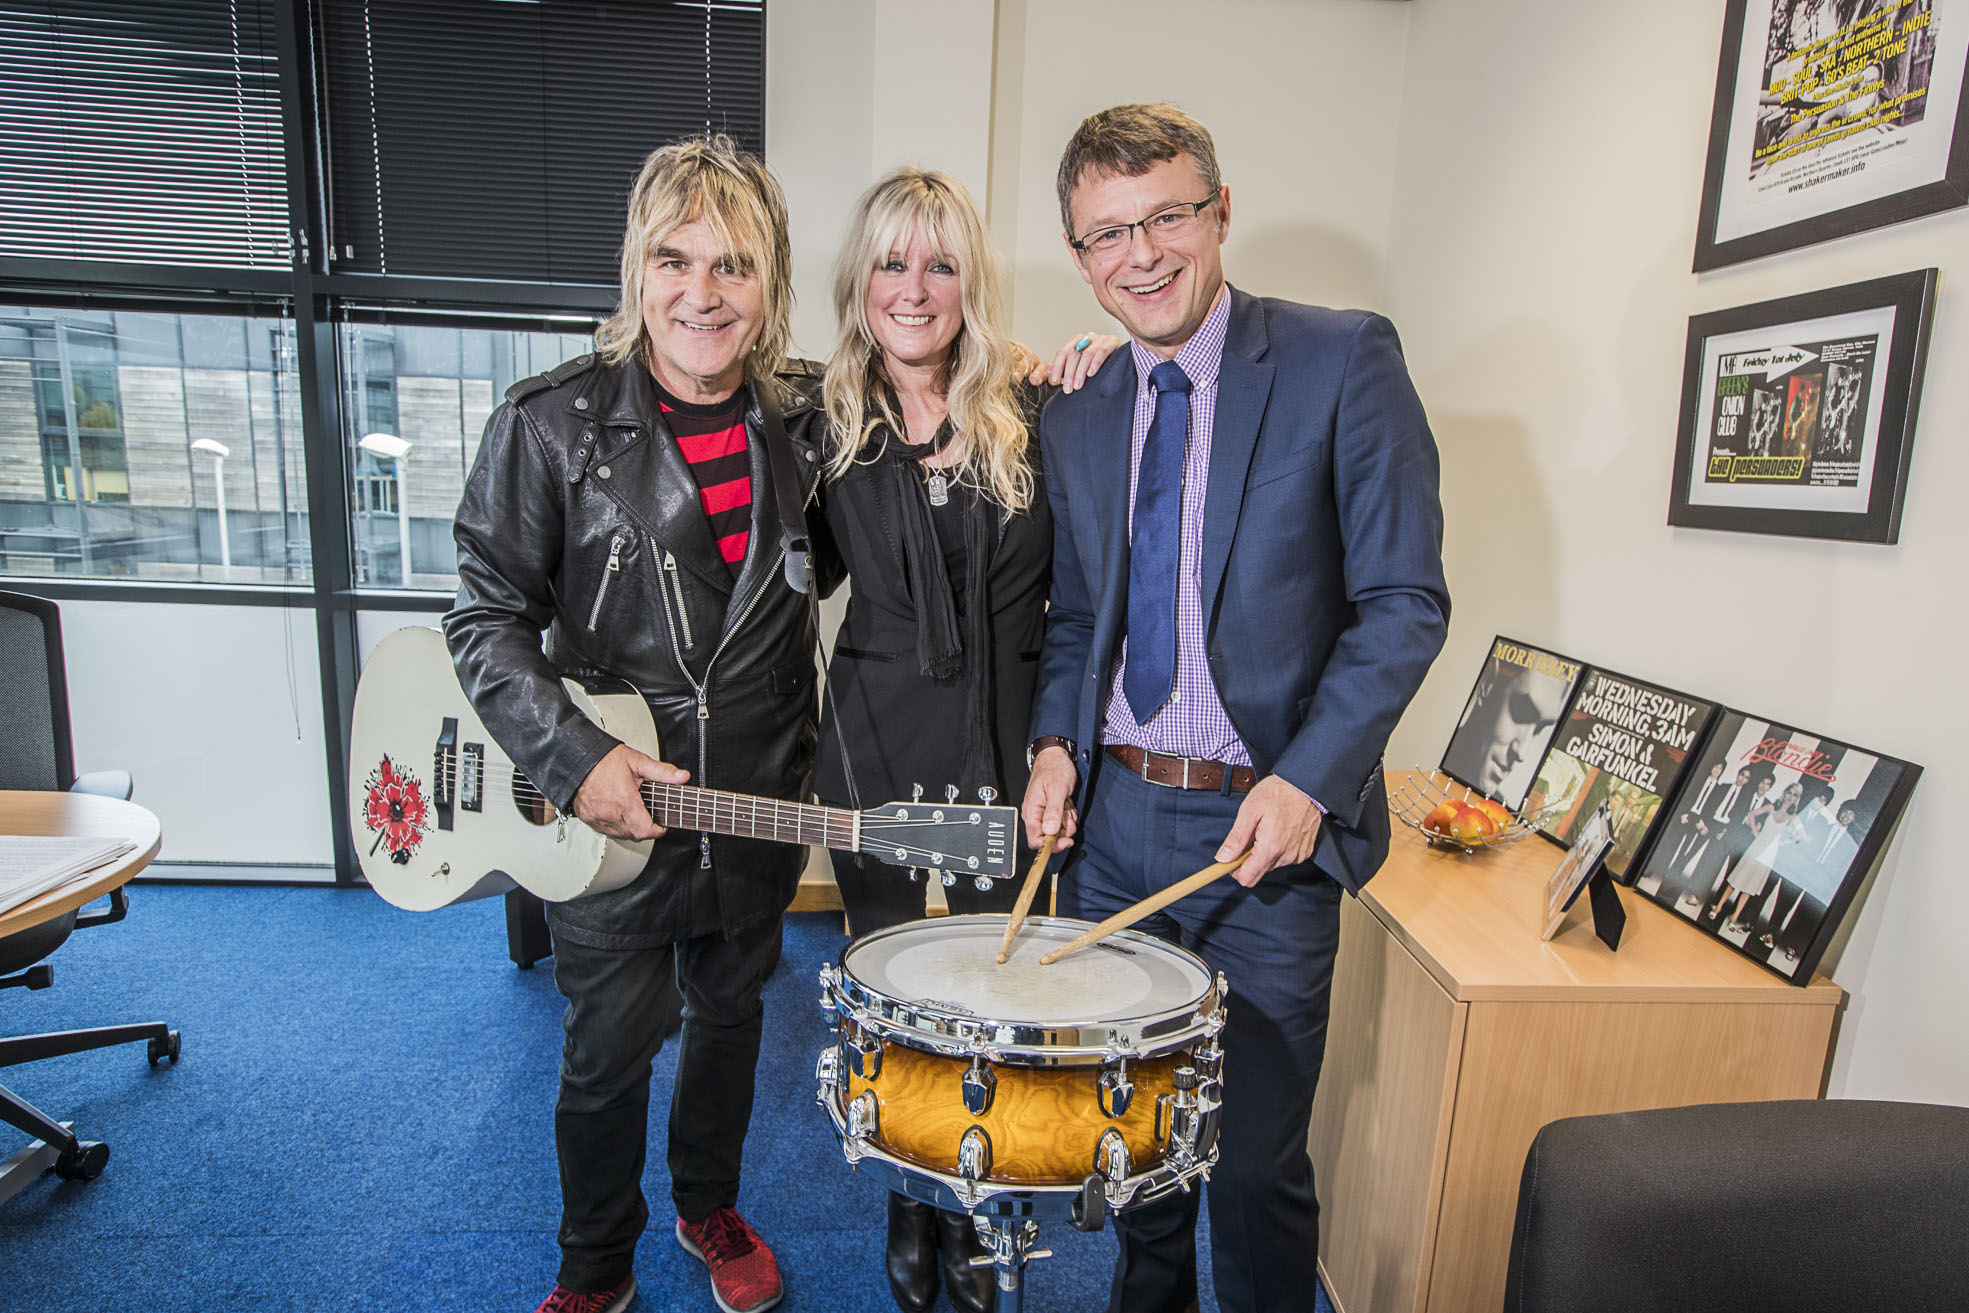 Mike Peters joins medical supergroup to say thanks to health staff for cancer care